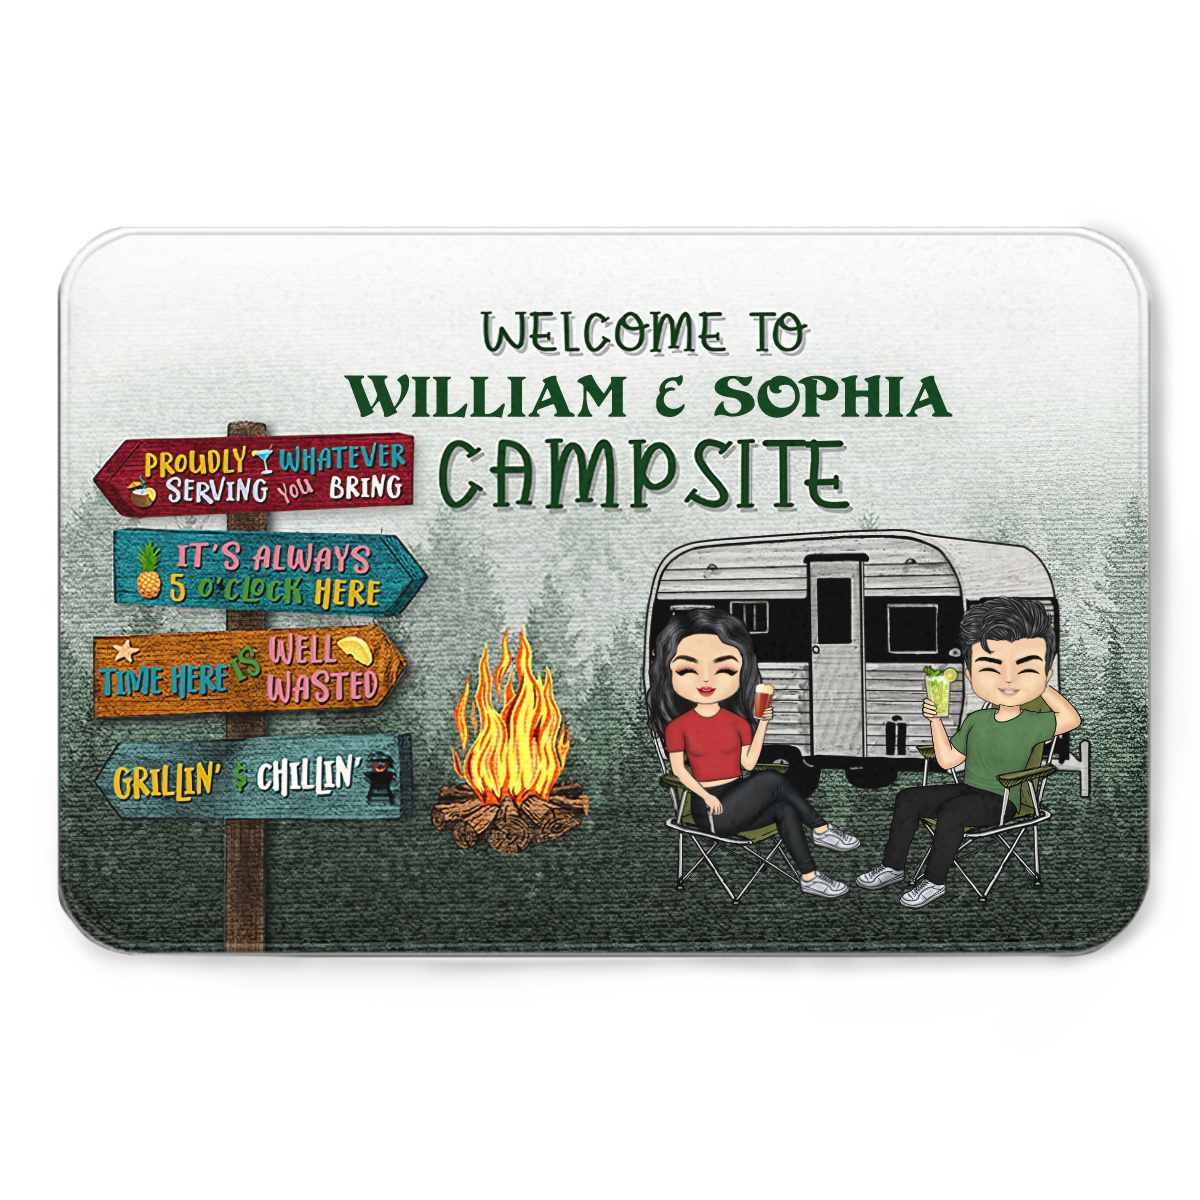 Time Here Is Well Wasted Camping - Gift For Camping Lovers - Personalized Custom Doormat